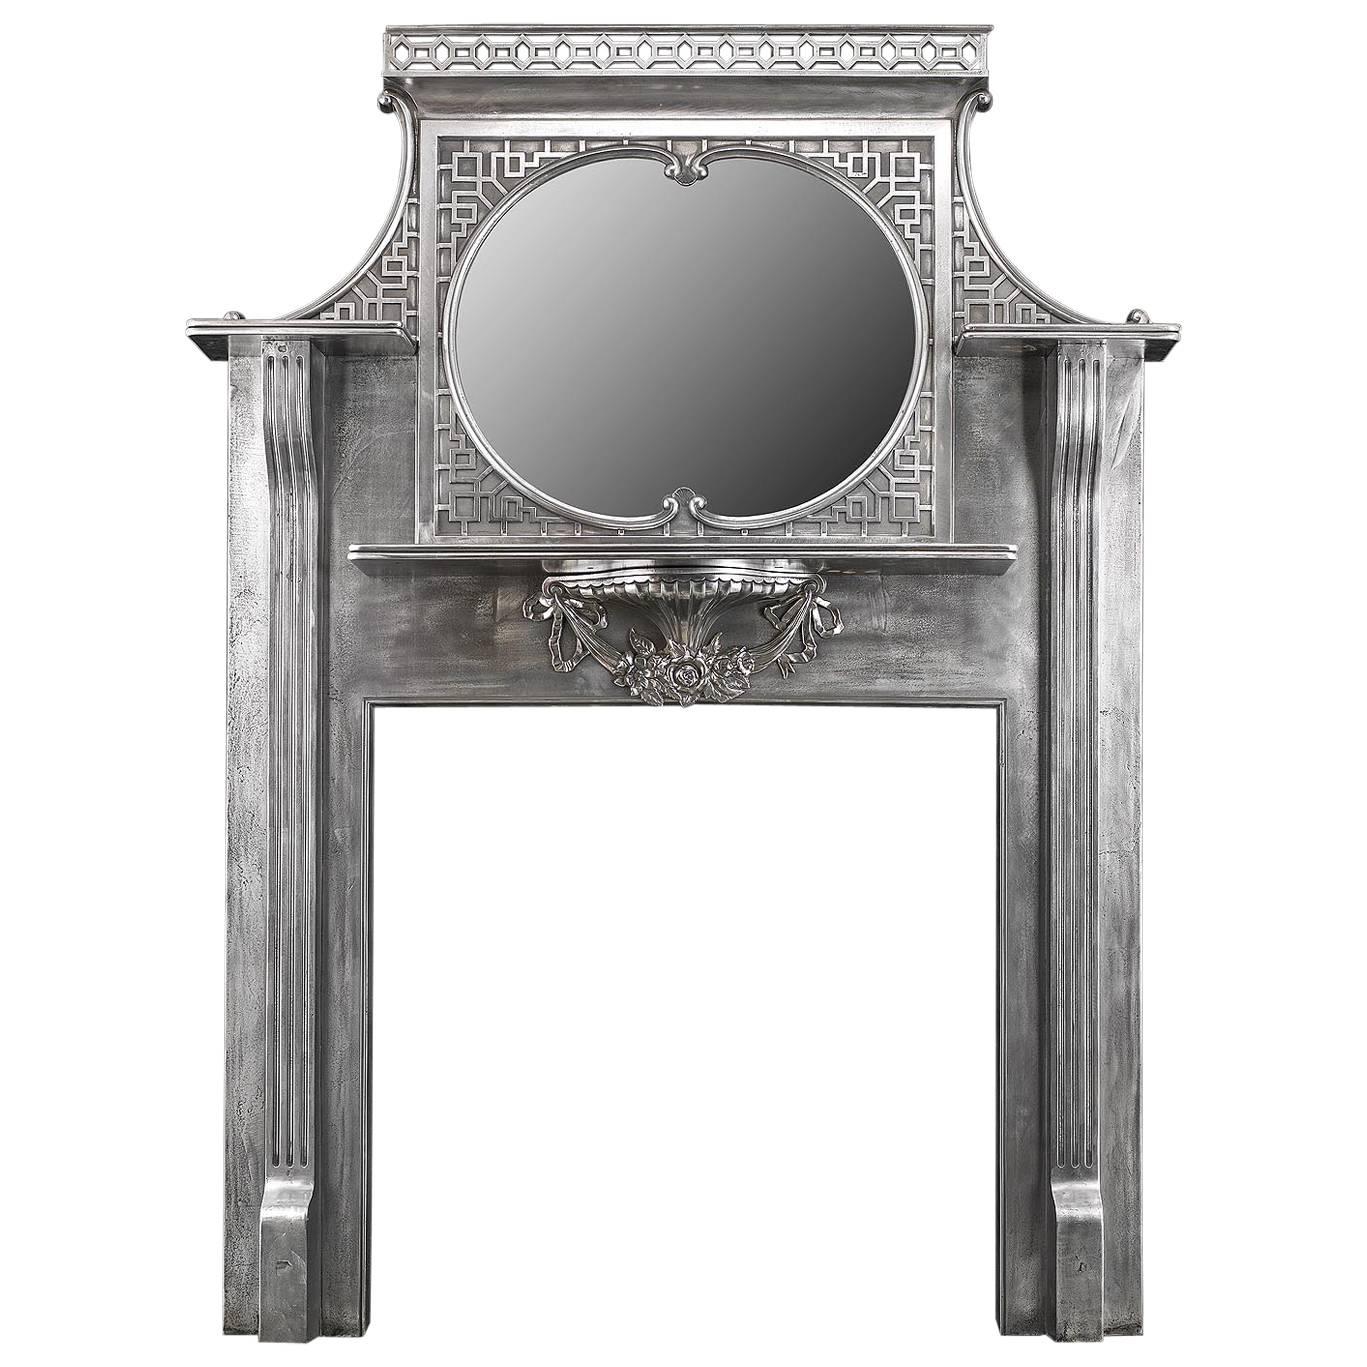 Edwardian Antique Cast Iron Fireplace in the Chinese Chippendale Manner